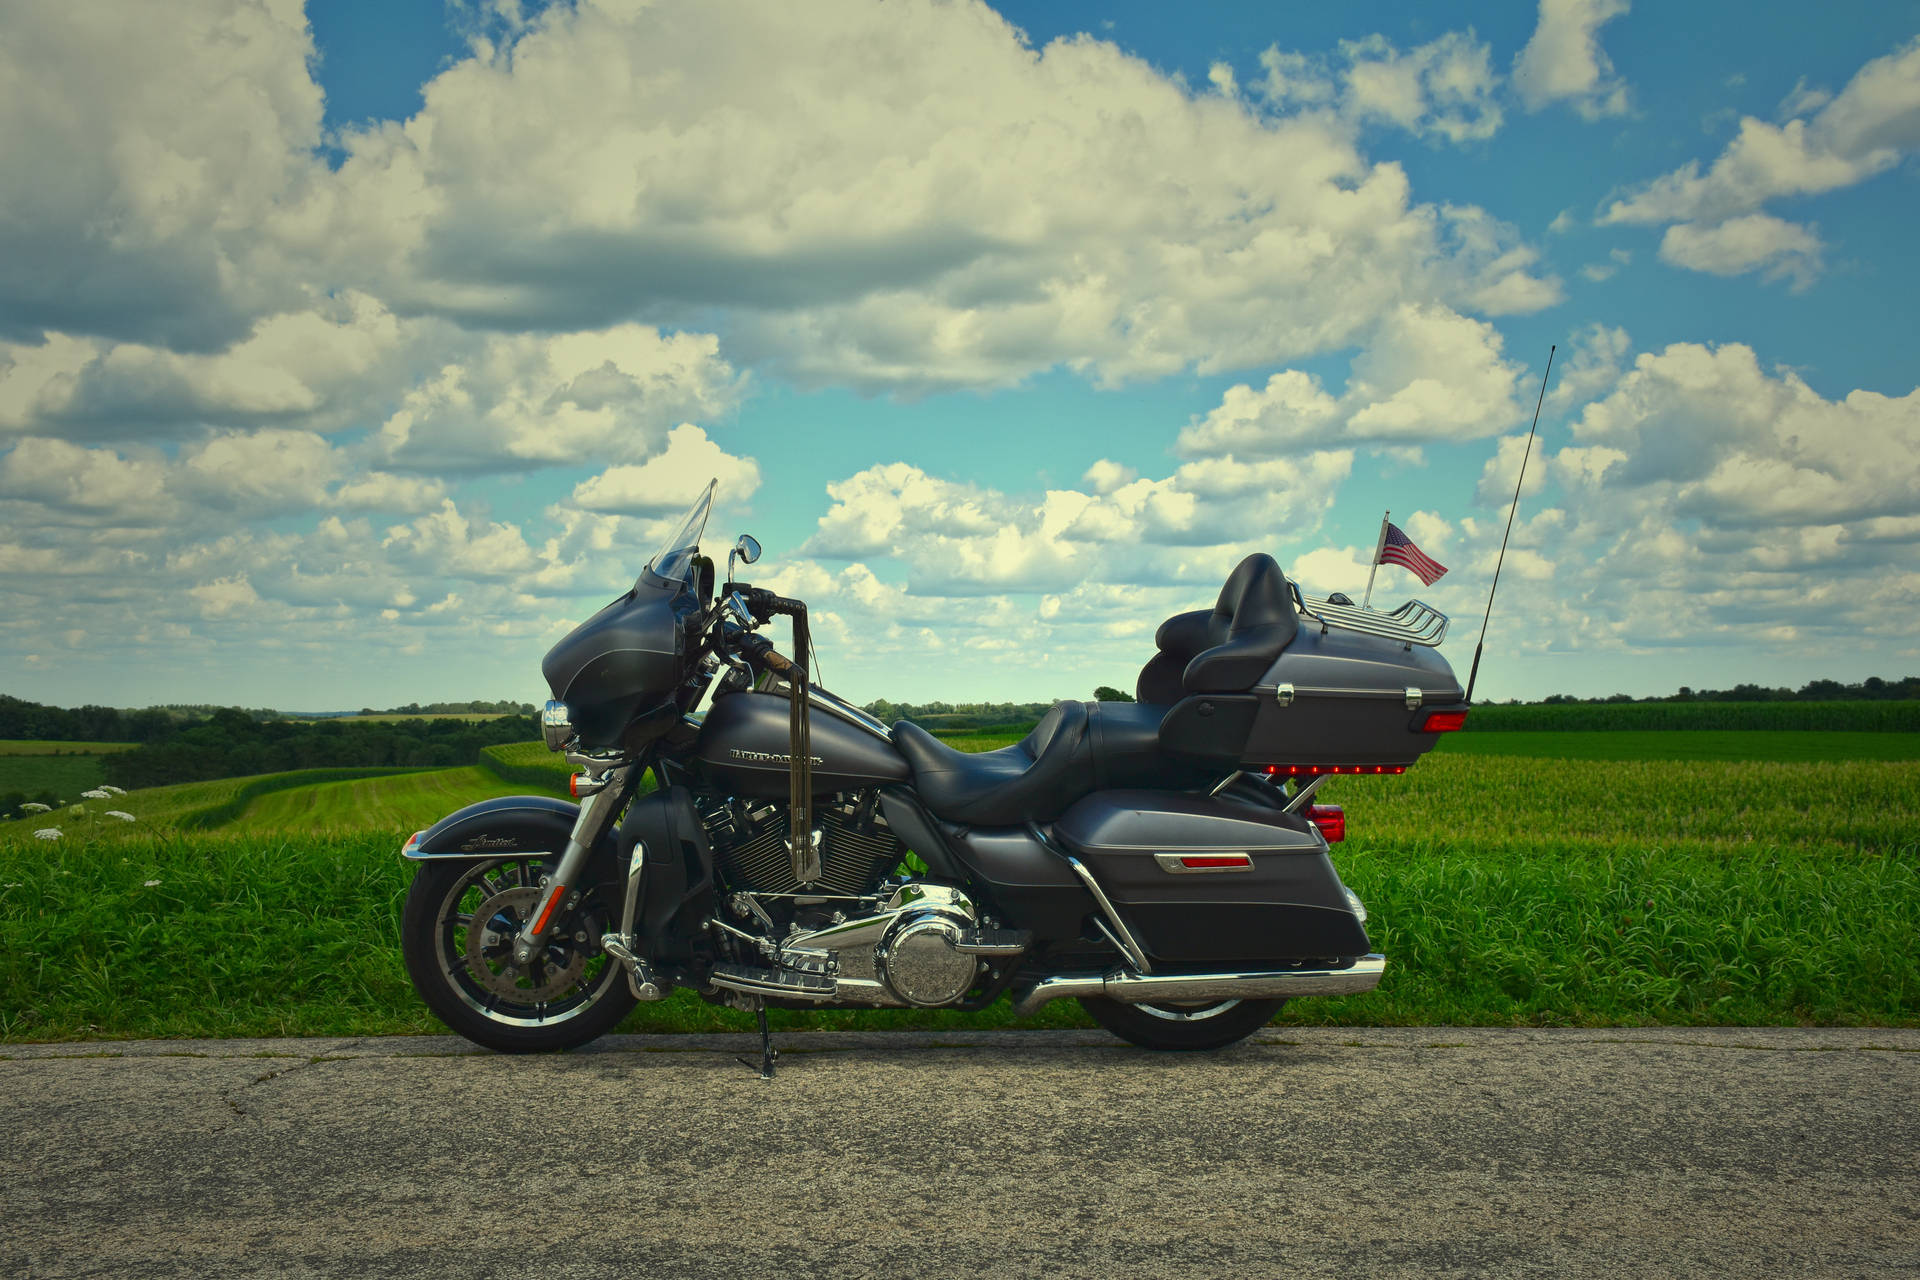 Black Harley Davidson With Clouds